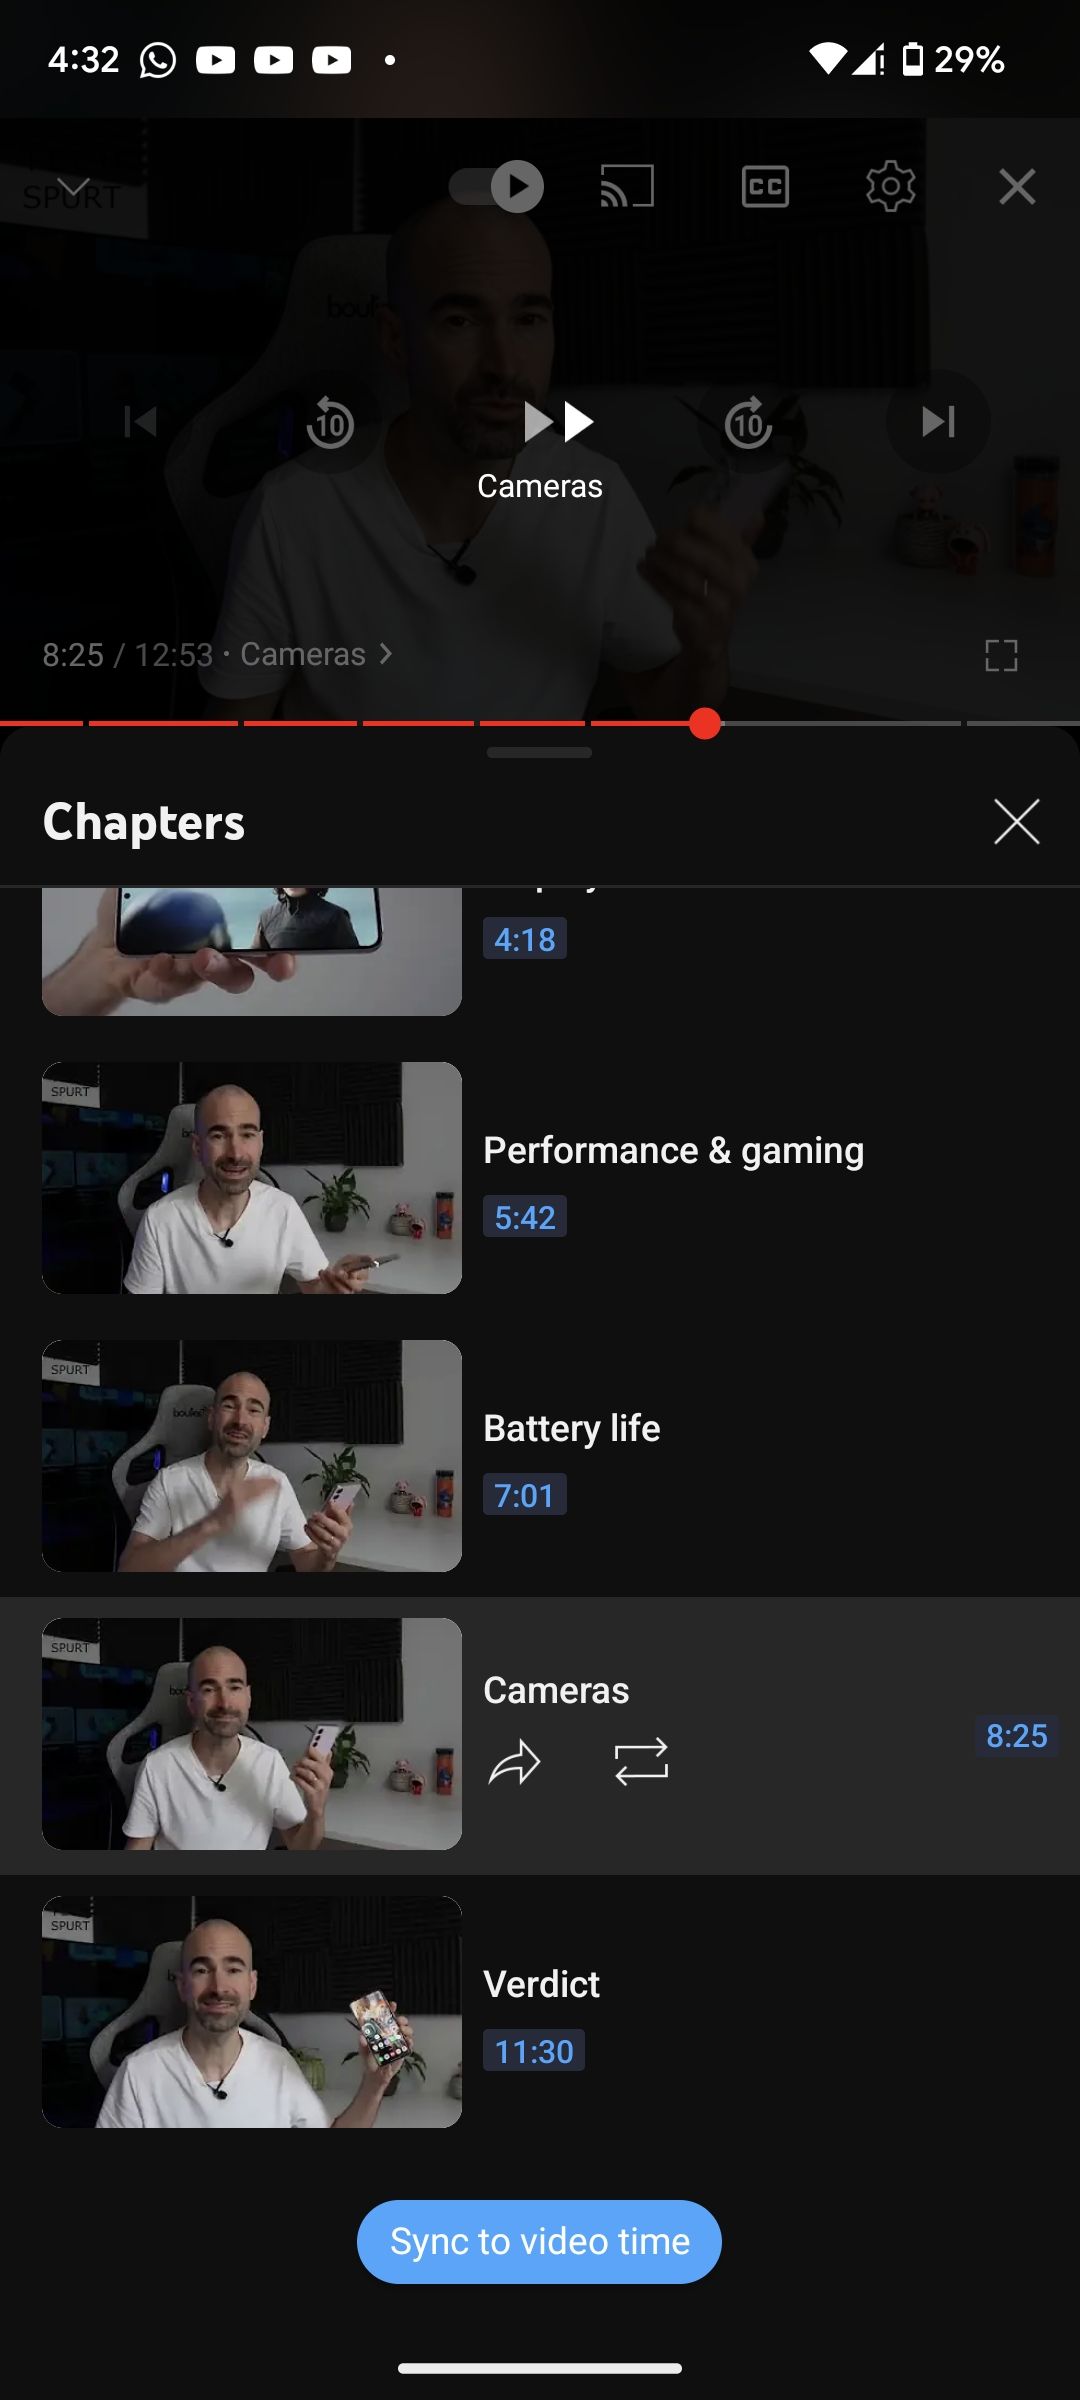 Navigating to video sections on YouTube using Chapters